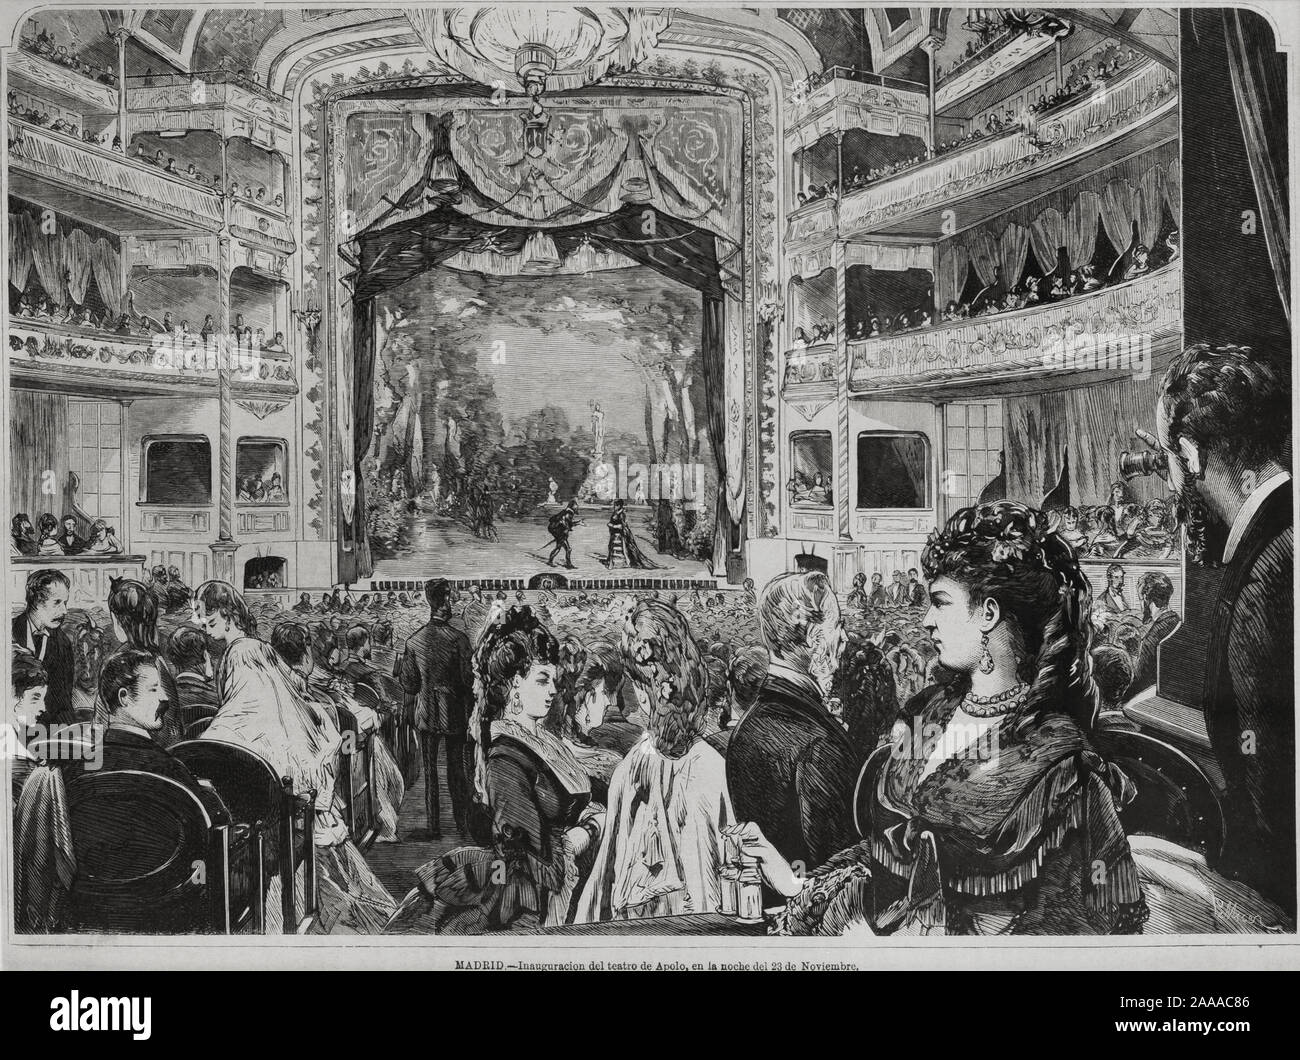 Spain, Madrid. Inauguration of the Apolo Theater on the night of November 23, 1873. Woodcut on paper. Tomas Carlos Capuz (1834-1899) and Jose Luis Pellicer (1842-1901). Stock Photo